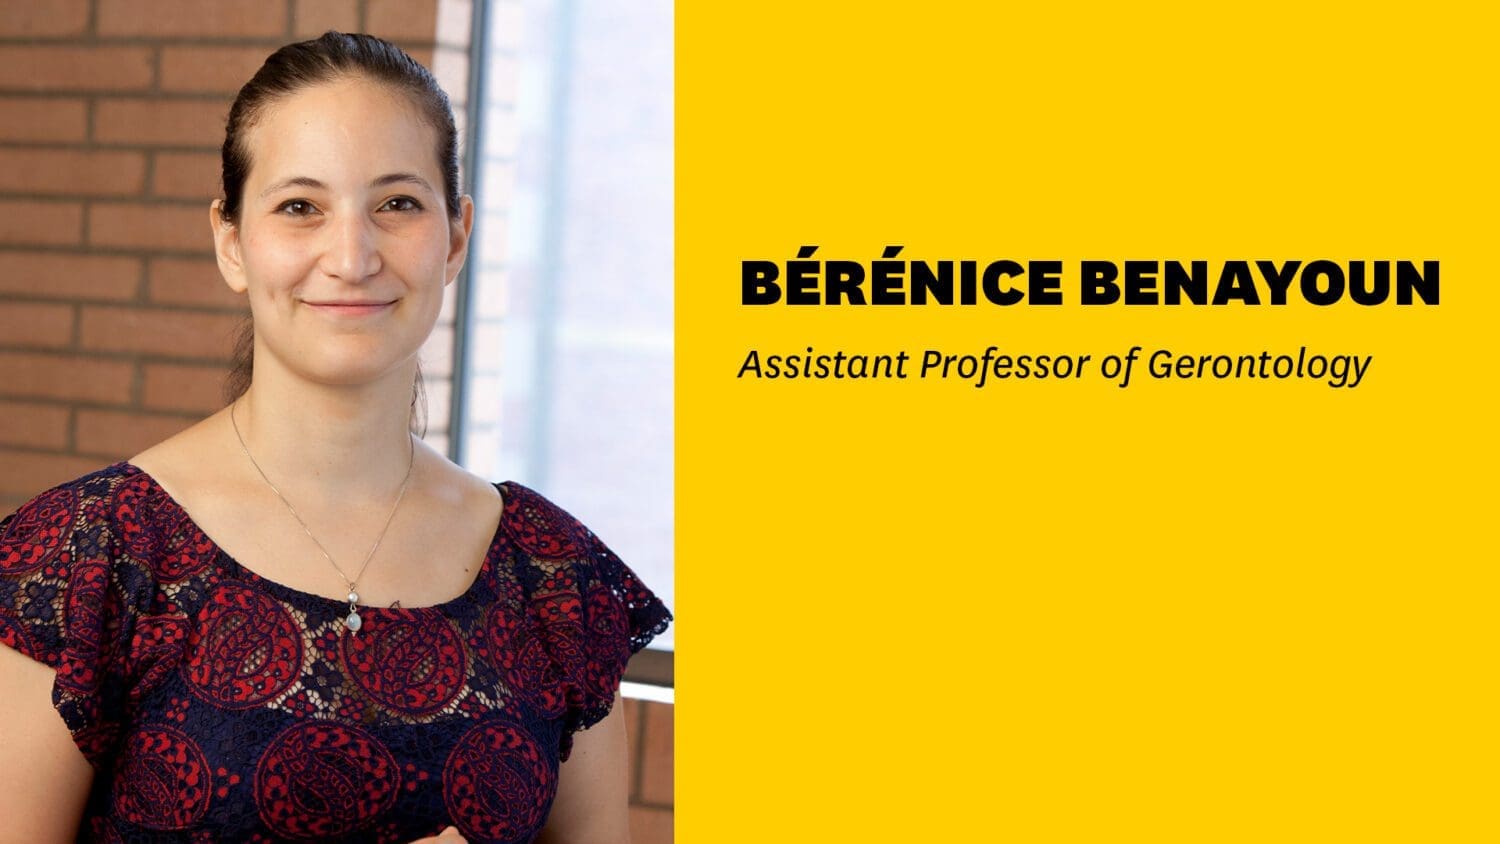 Headshot of Bérénice Benayoun with name and faculty title